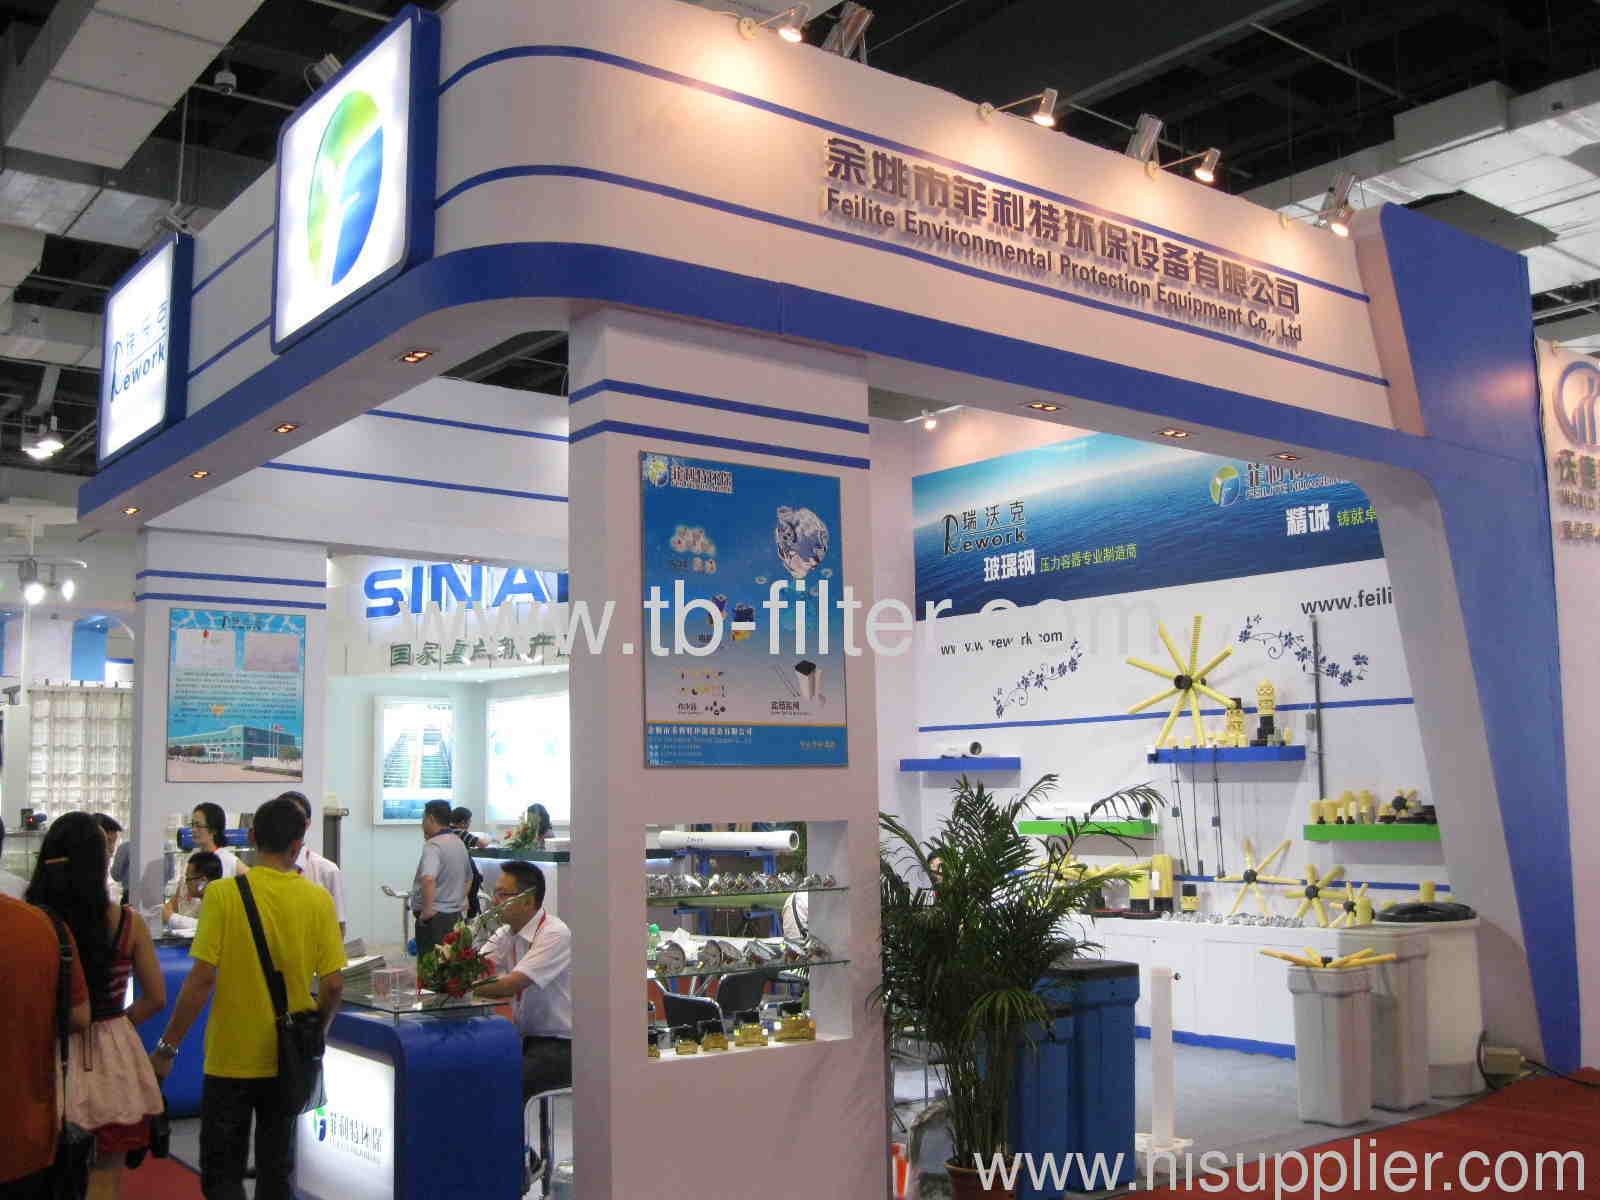 We will attend the AQUATECH CHINA 2013